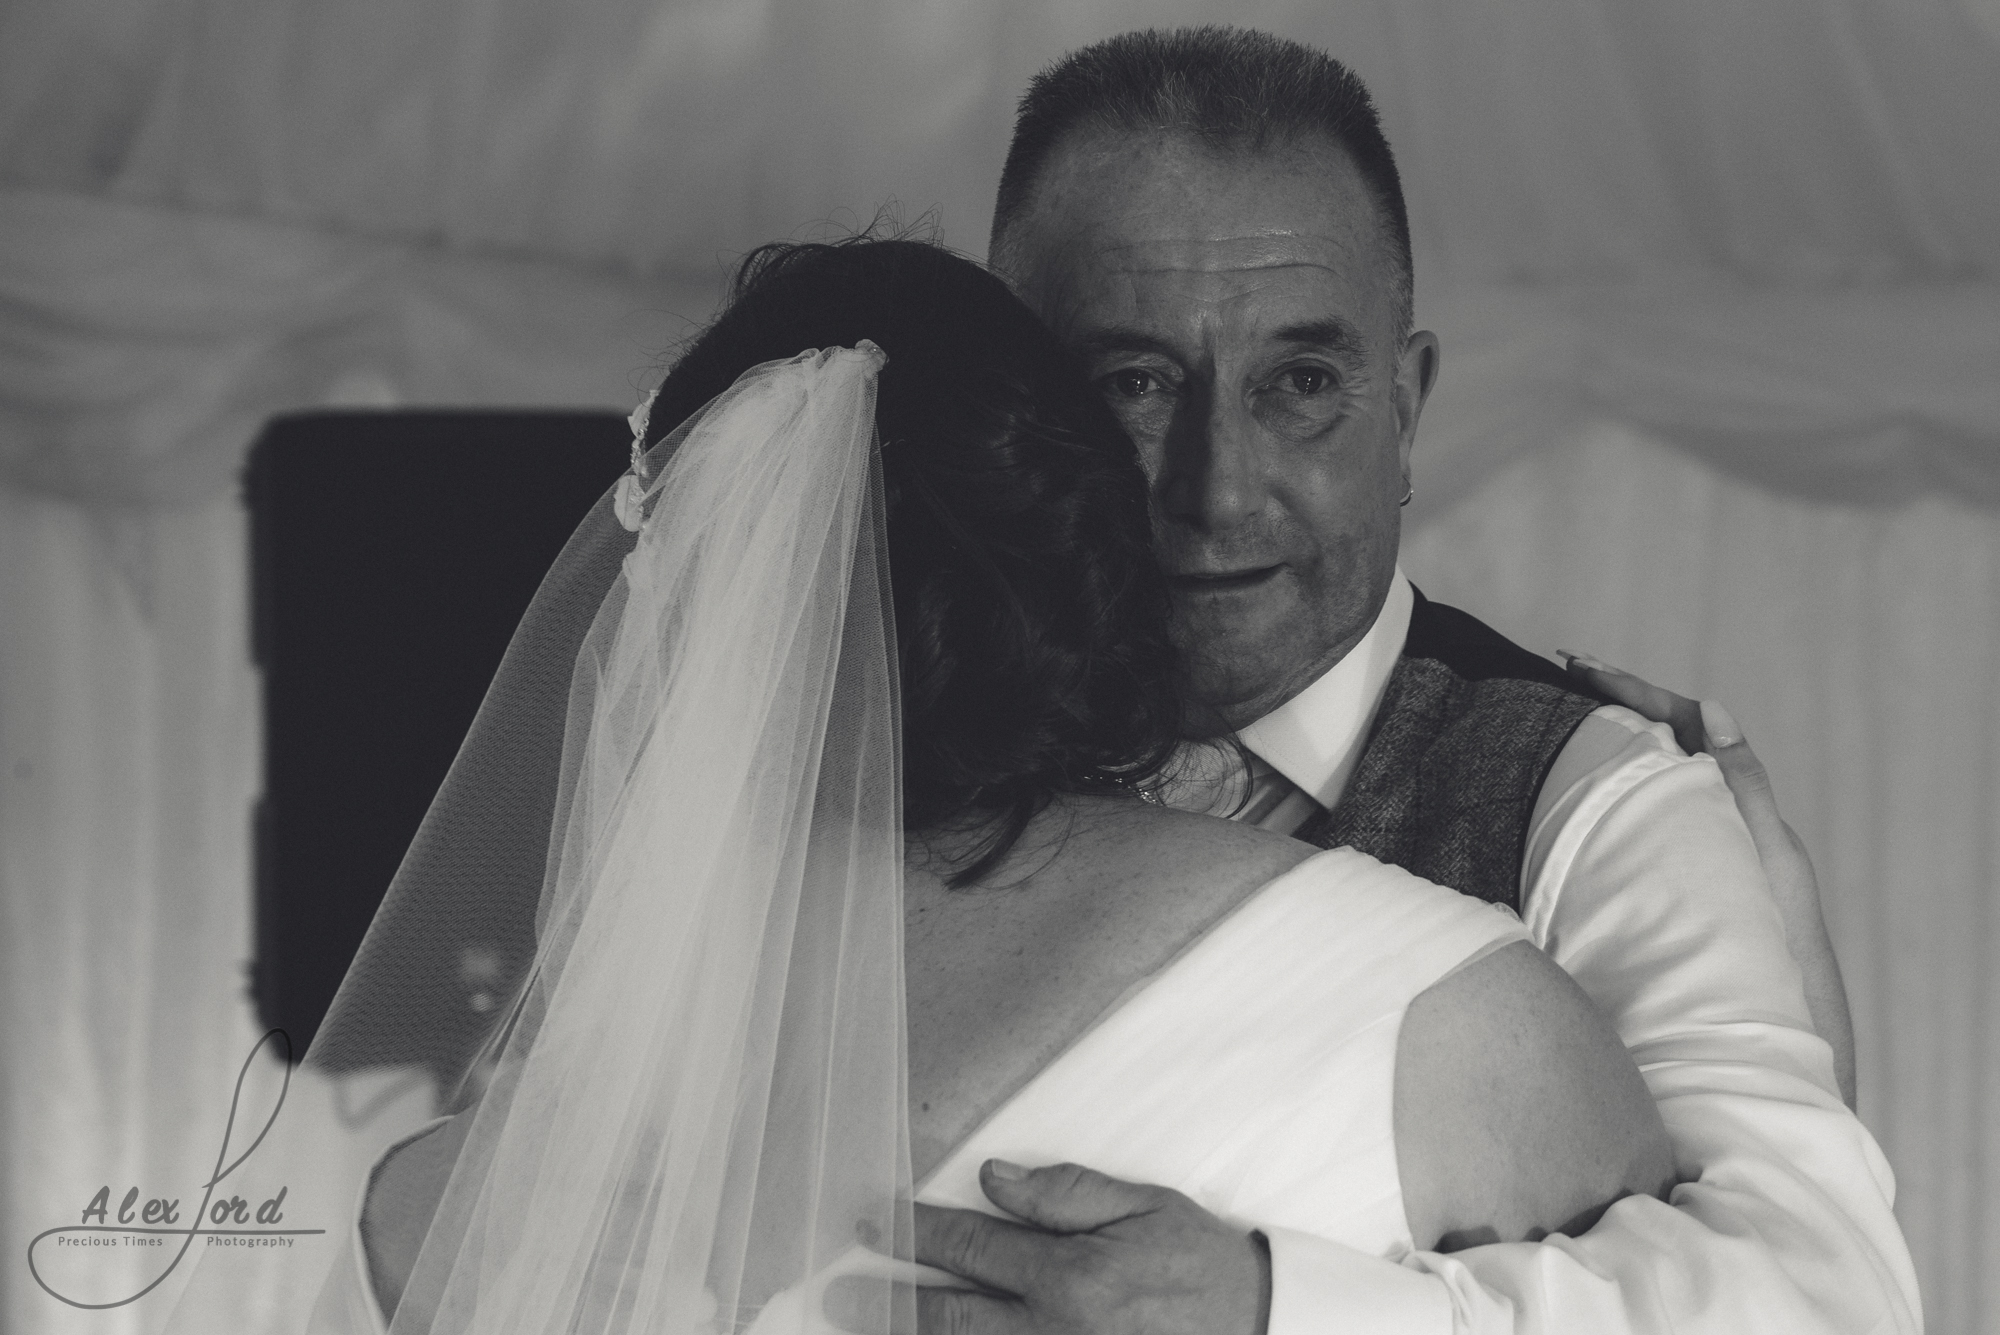 The bride shares a dance with her emotional dad.